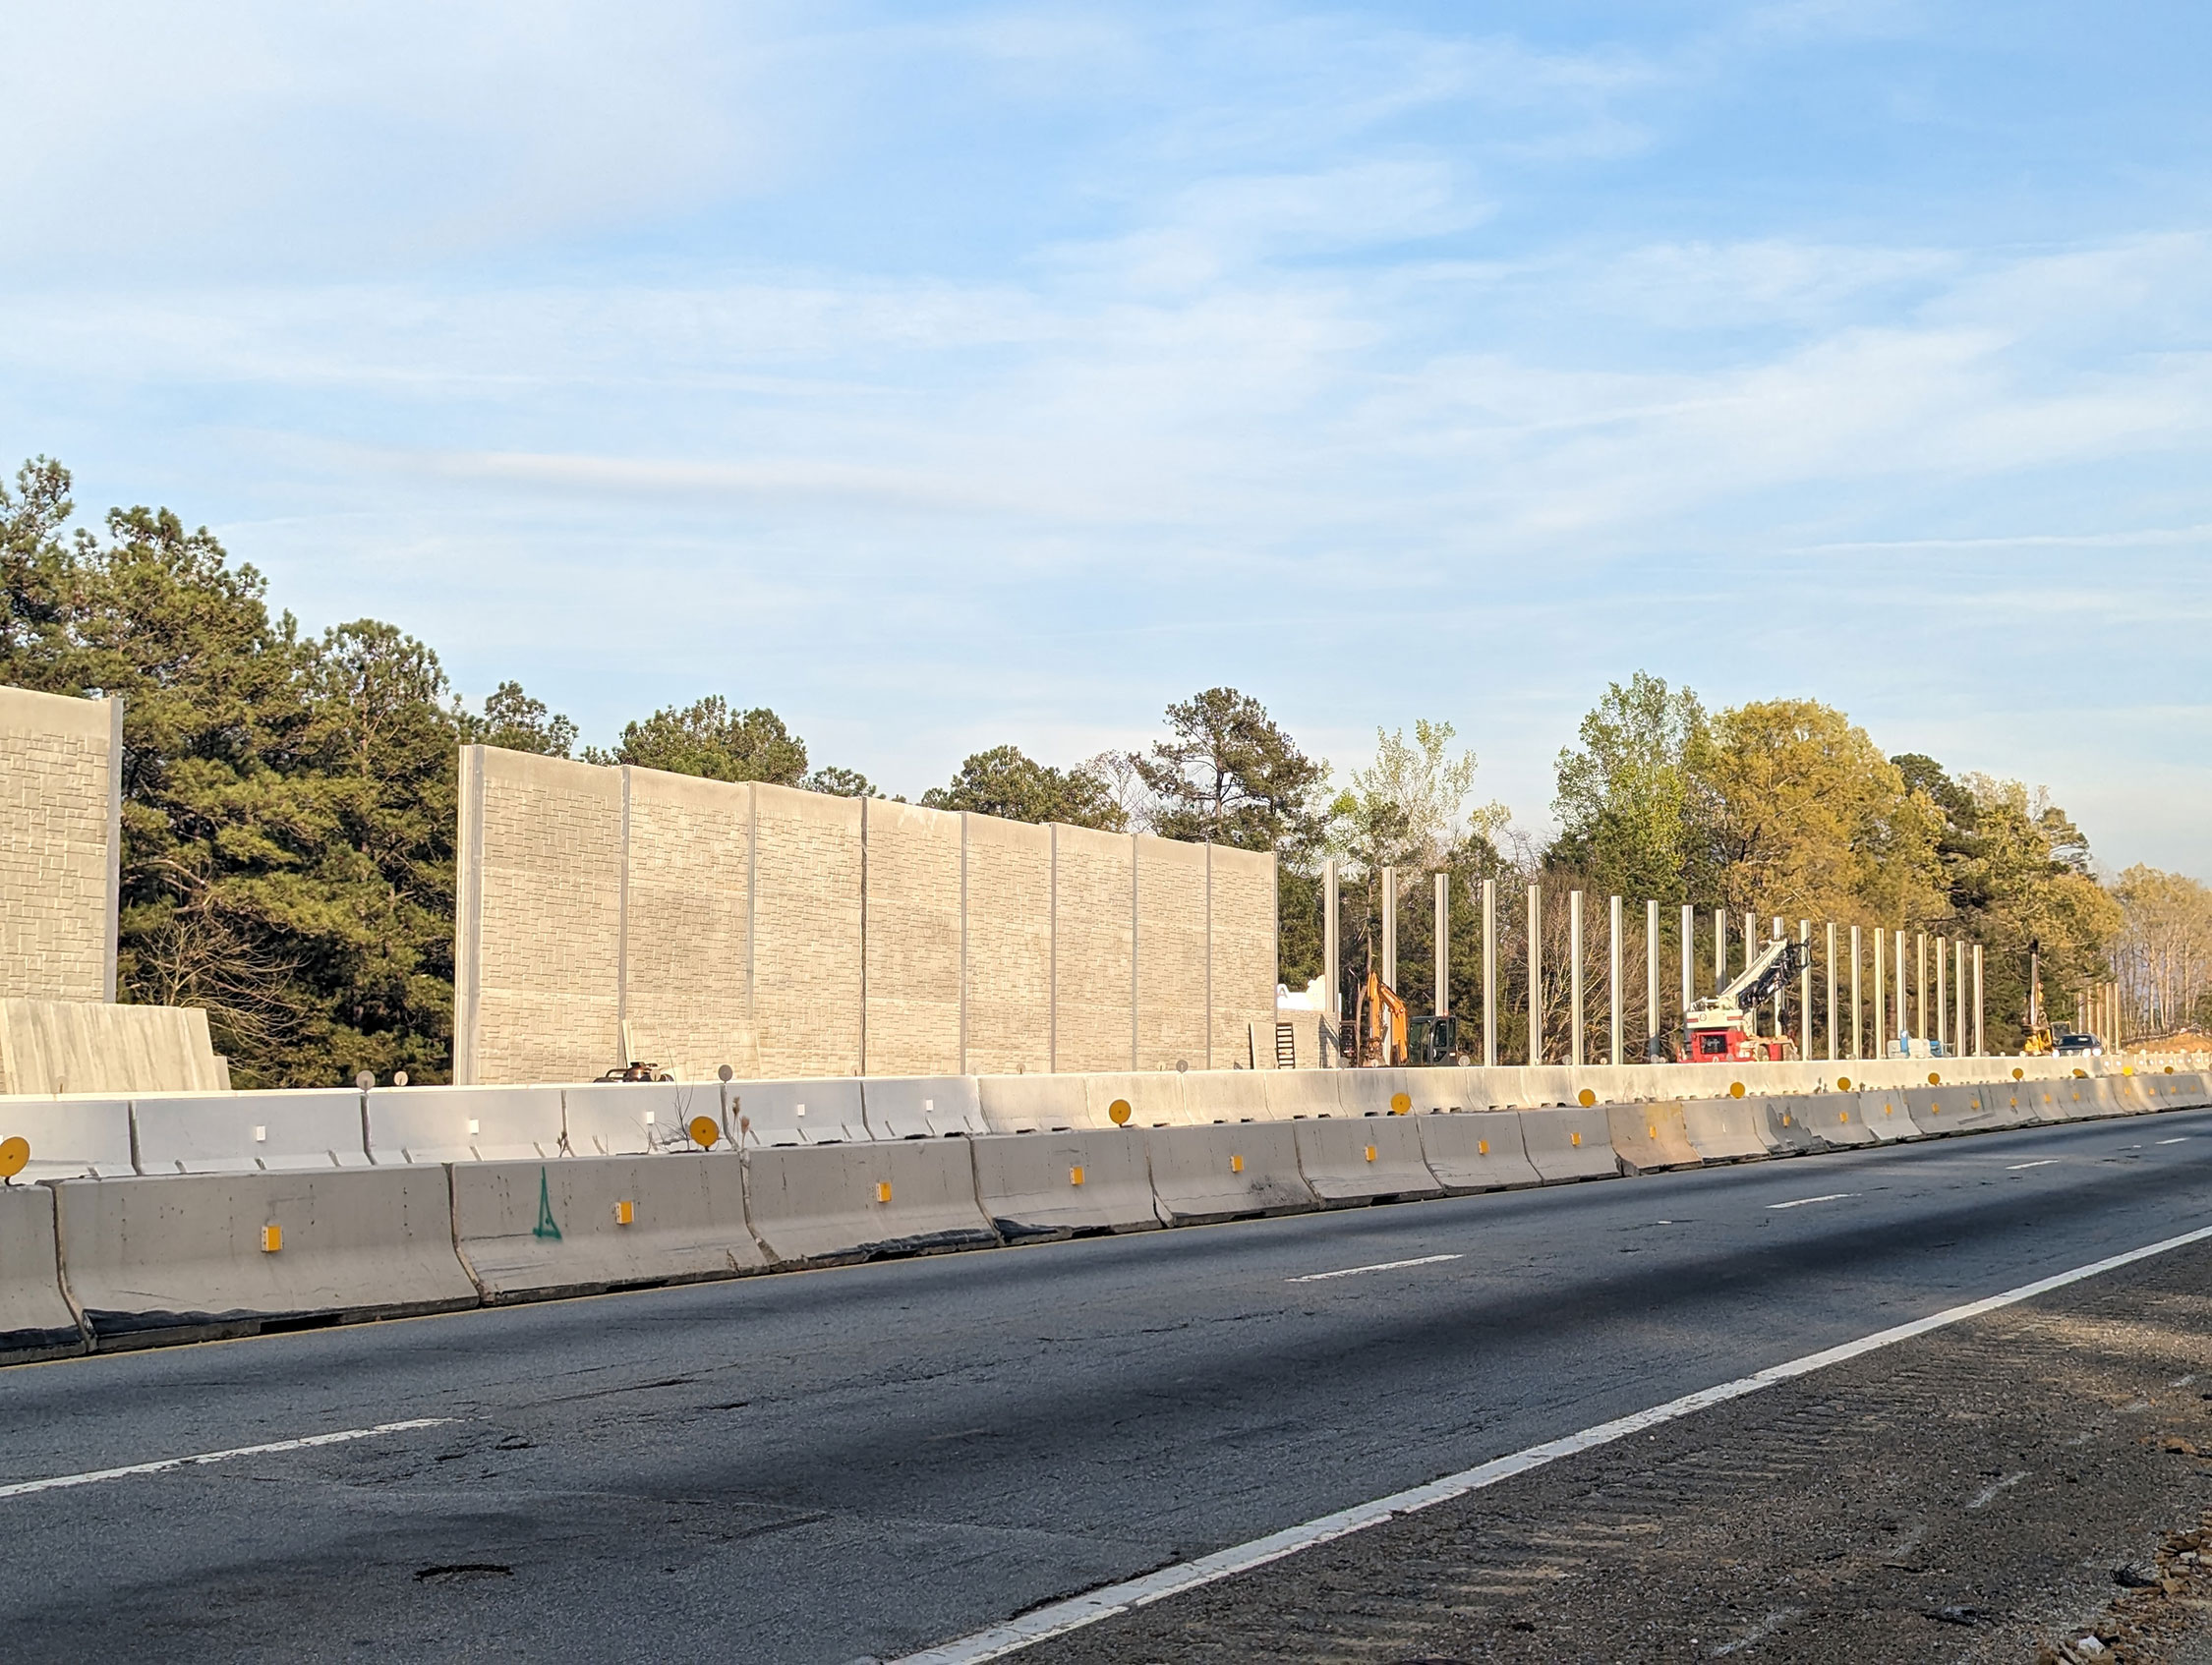 Much progress has been made on the I-26 Westbound sound barrier wall.  The concrete panels are dropped into place between two steel I-beams that are set in a solid concrete foundation.  Some sections of the wall reach 30’ high!